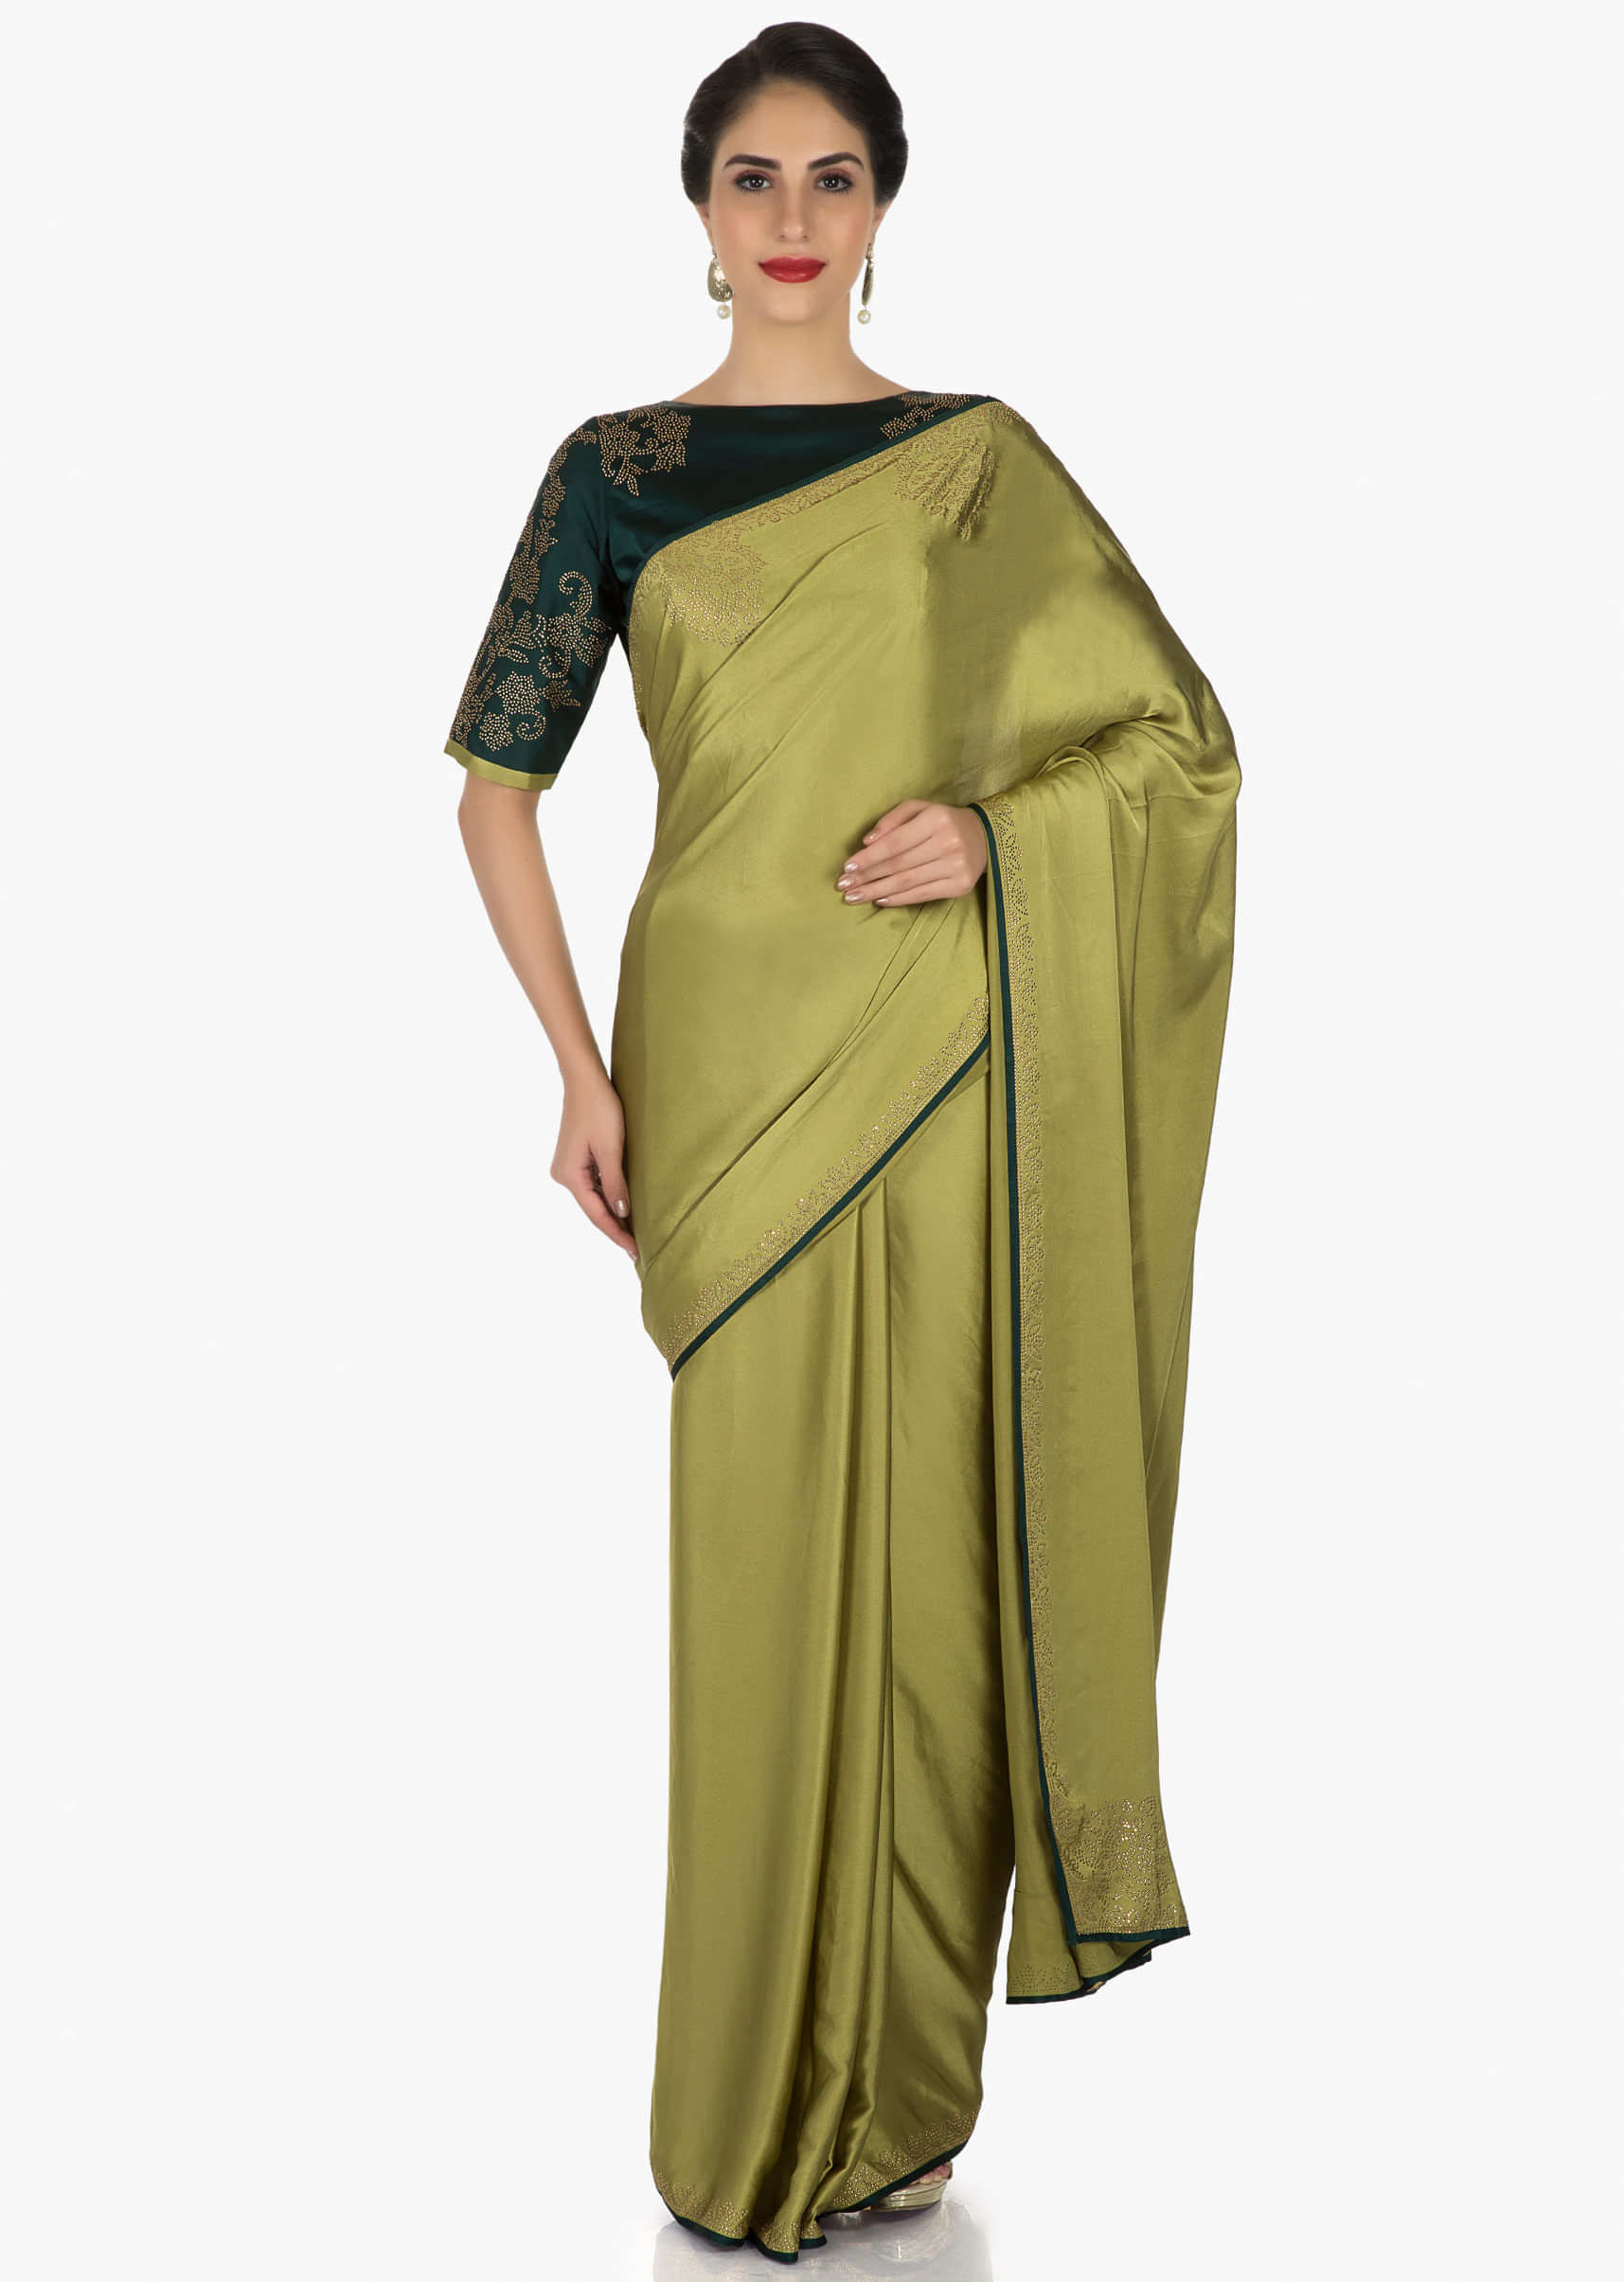 Olive Green Saree Beautified With The Kundan Embroidery Online - Kalki Fashion